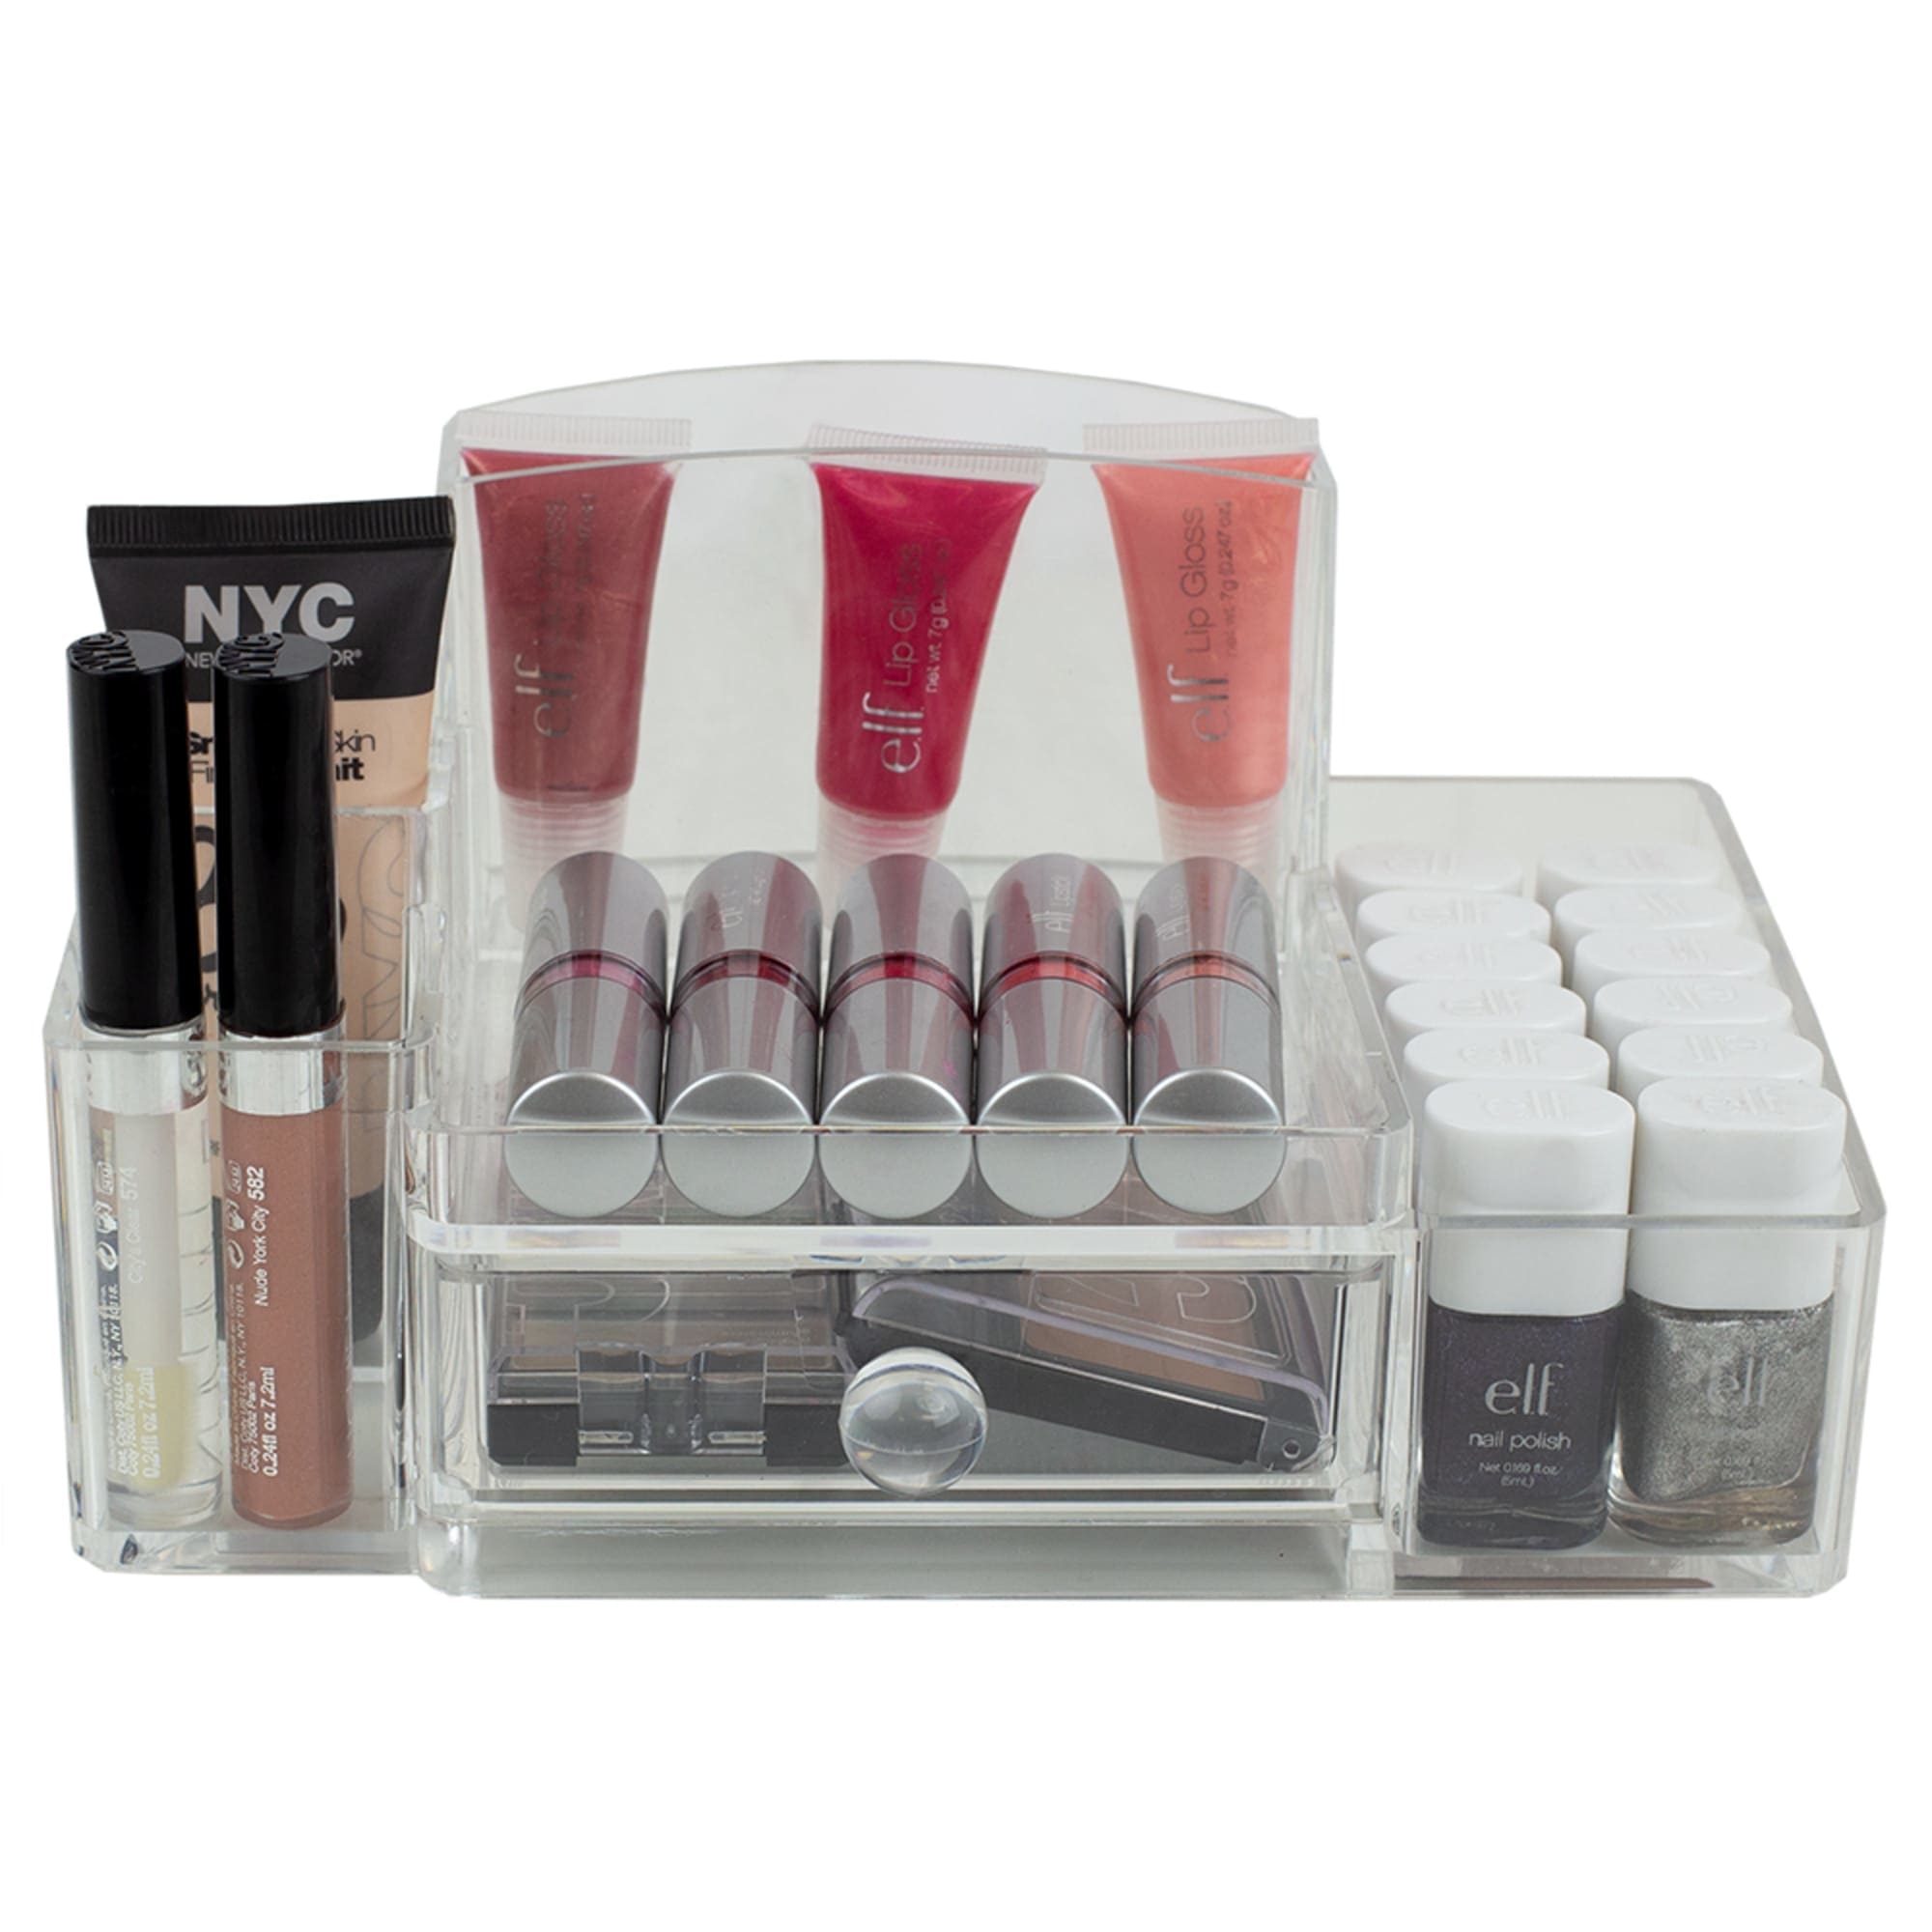 Home Basics Deluxe Medium Shatter-Resistant Plastic Multi-Compartment Cosmetic Organizer with Easy Open Drawer, Clear $8.00 EACH, CASE PACK OF 12